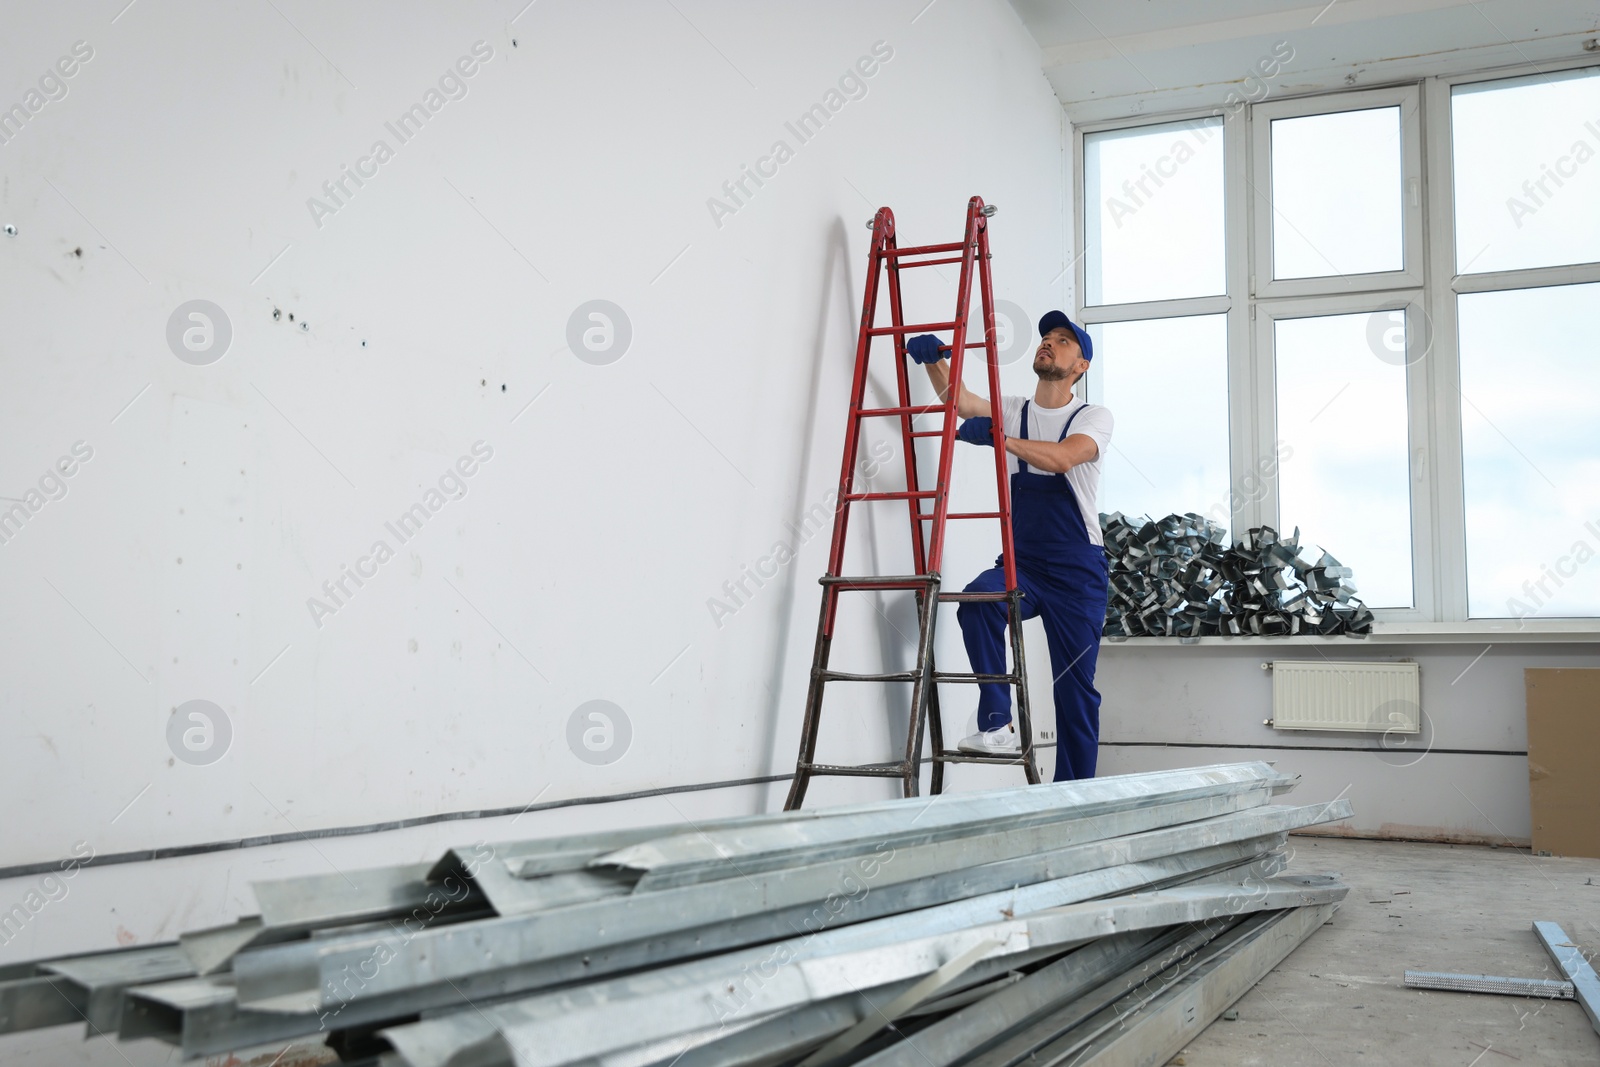 Photo of Construction worker climbing up stepladder in room prepared for renovation